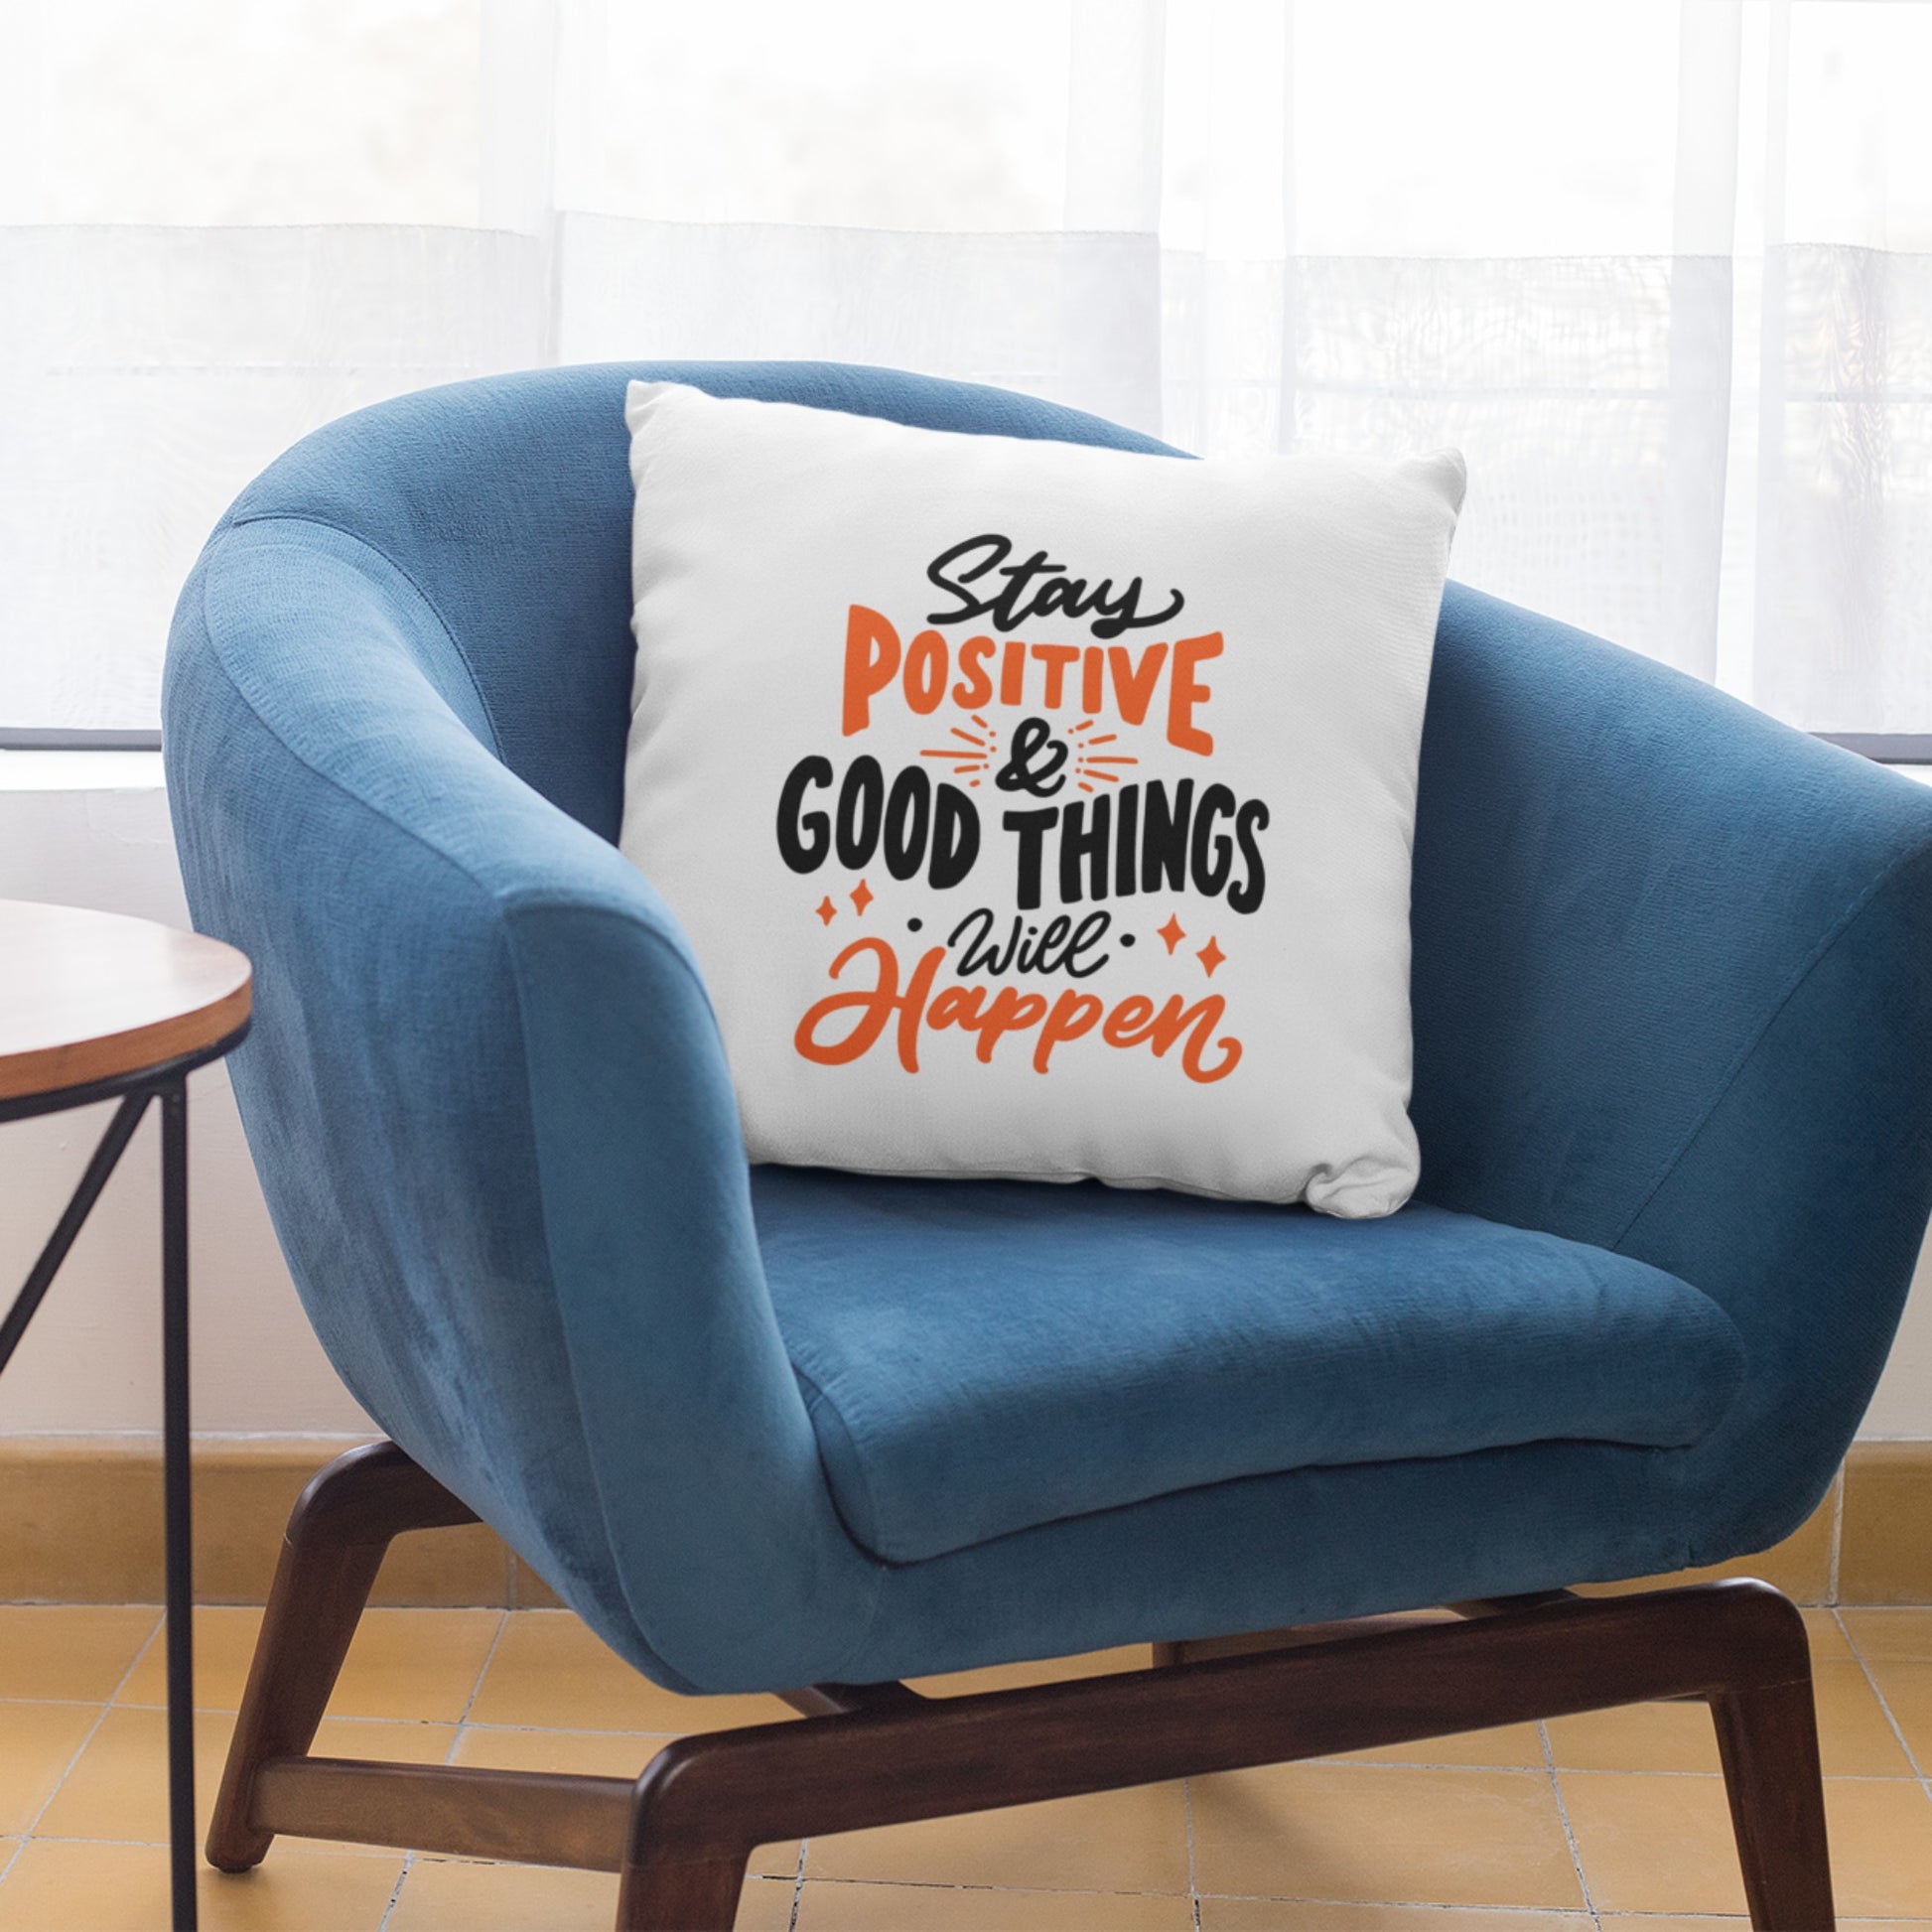 Stylish Printed Throw Pillow with Positive Motivation